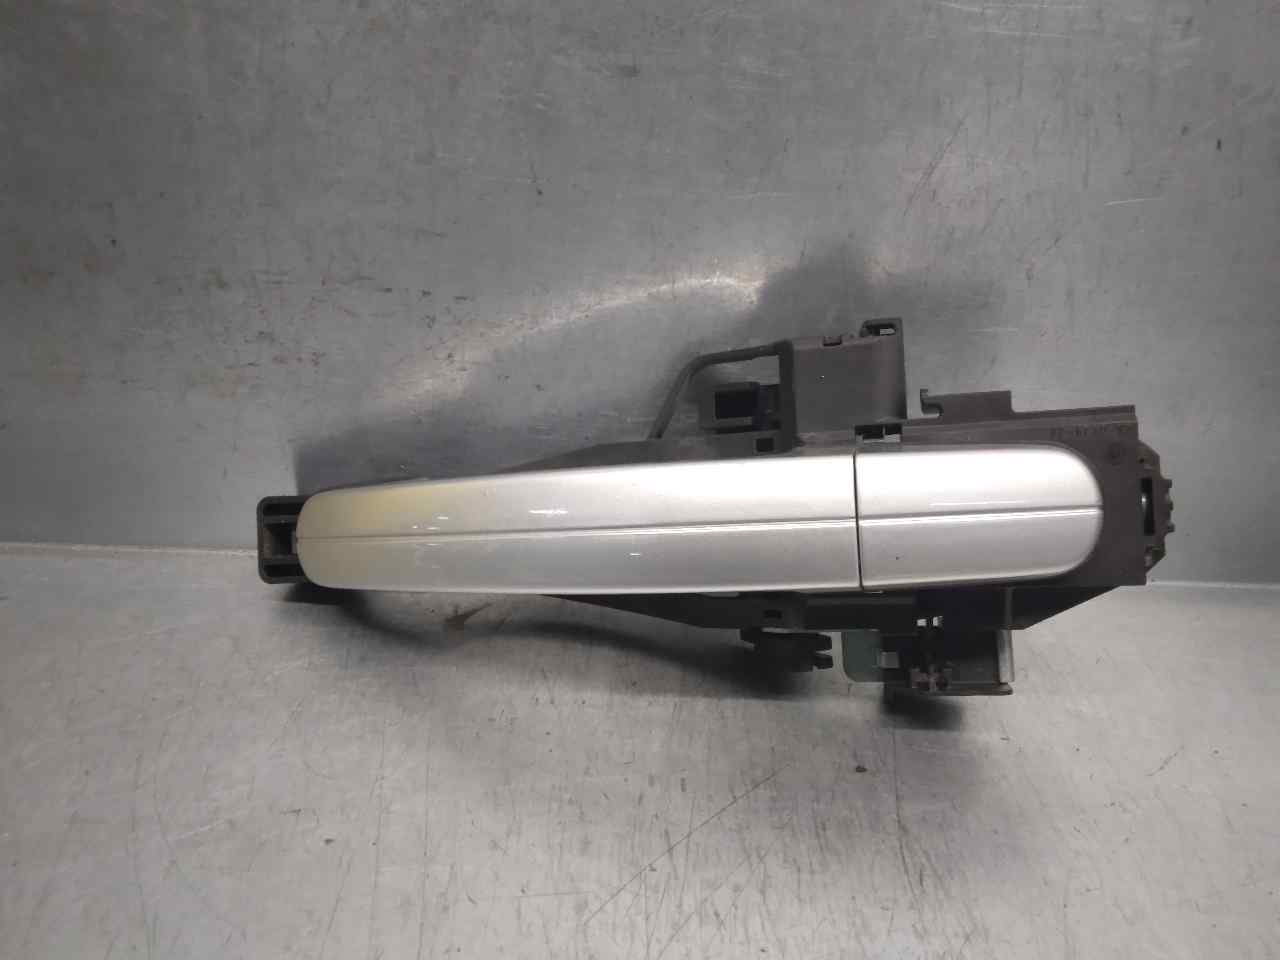 FORD Focus 3 generation (2011-2020) Rear right door outer handle BM51A224A36CG, 5PUERTAS 19863987